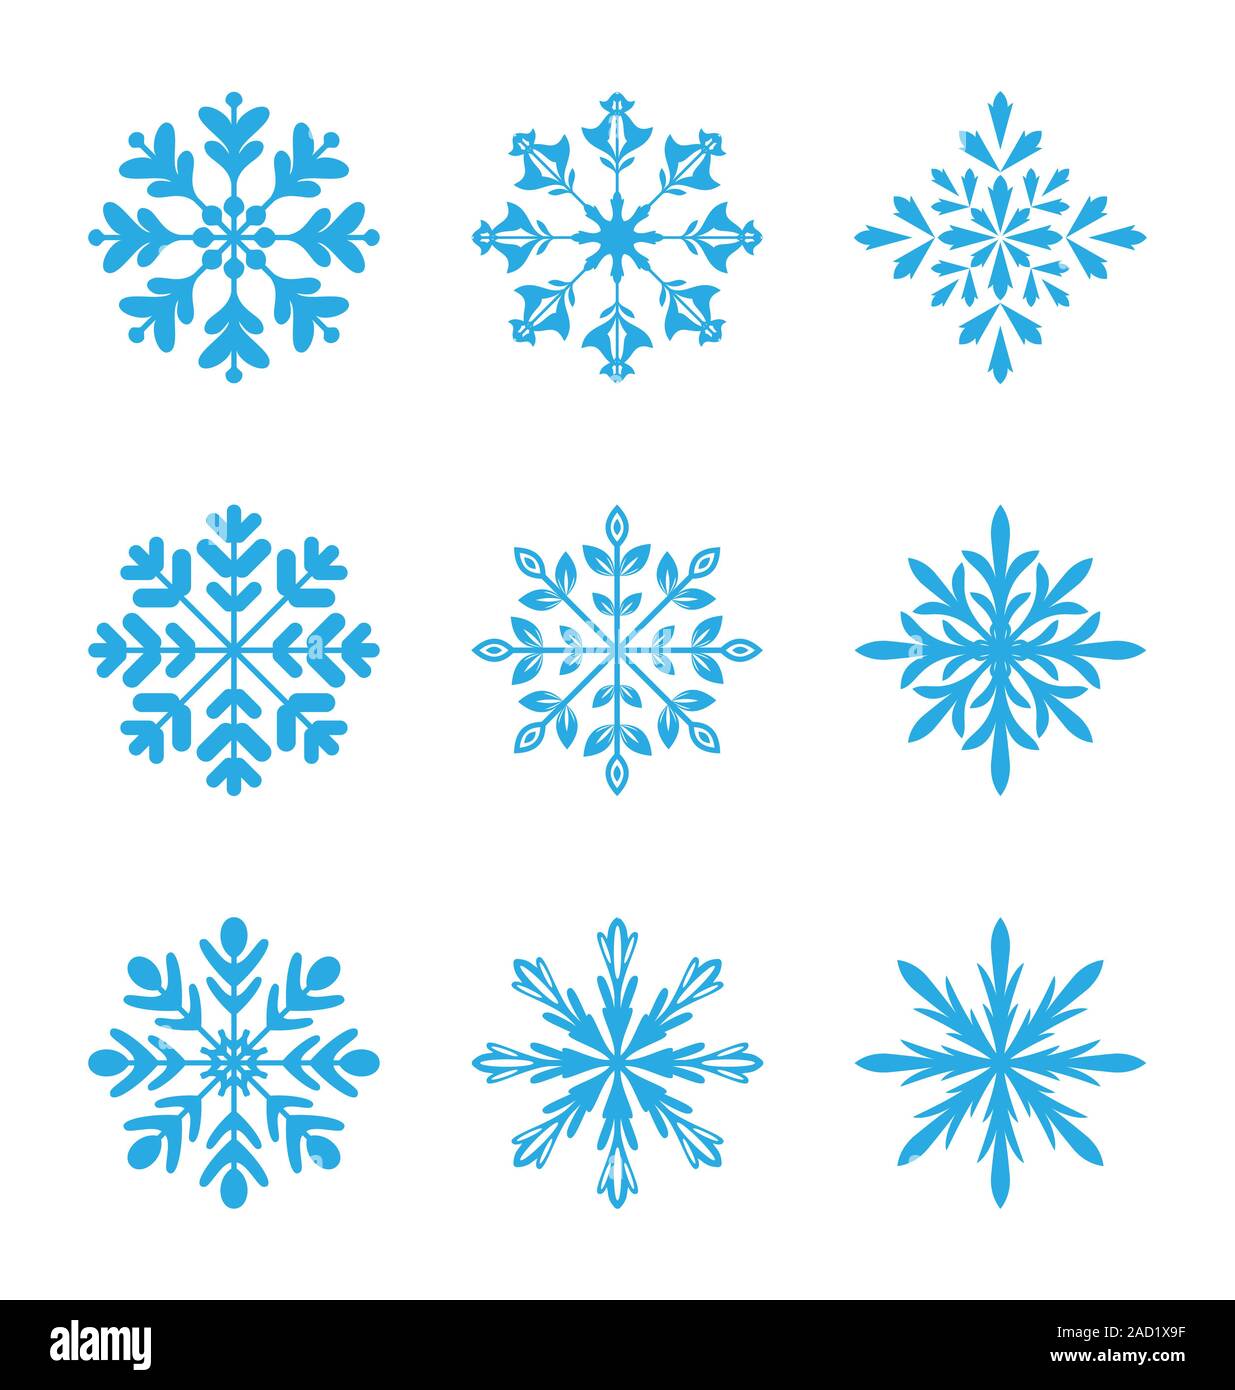 Snow Flakes Pattern Design Layouts, Winter Frozen Icon Variations